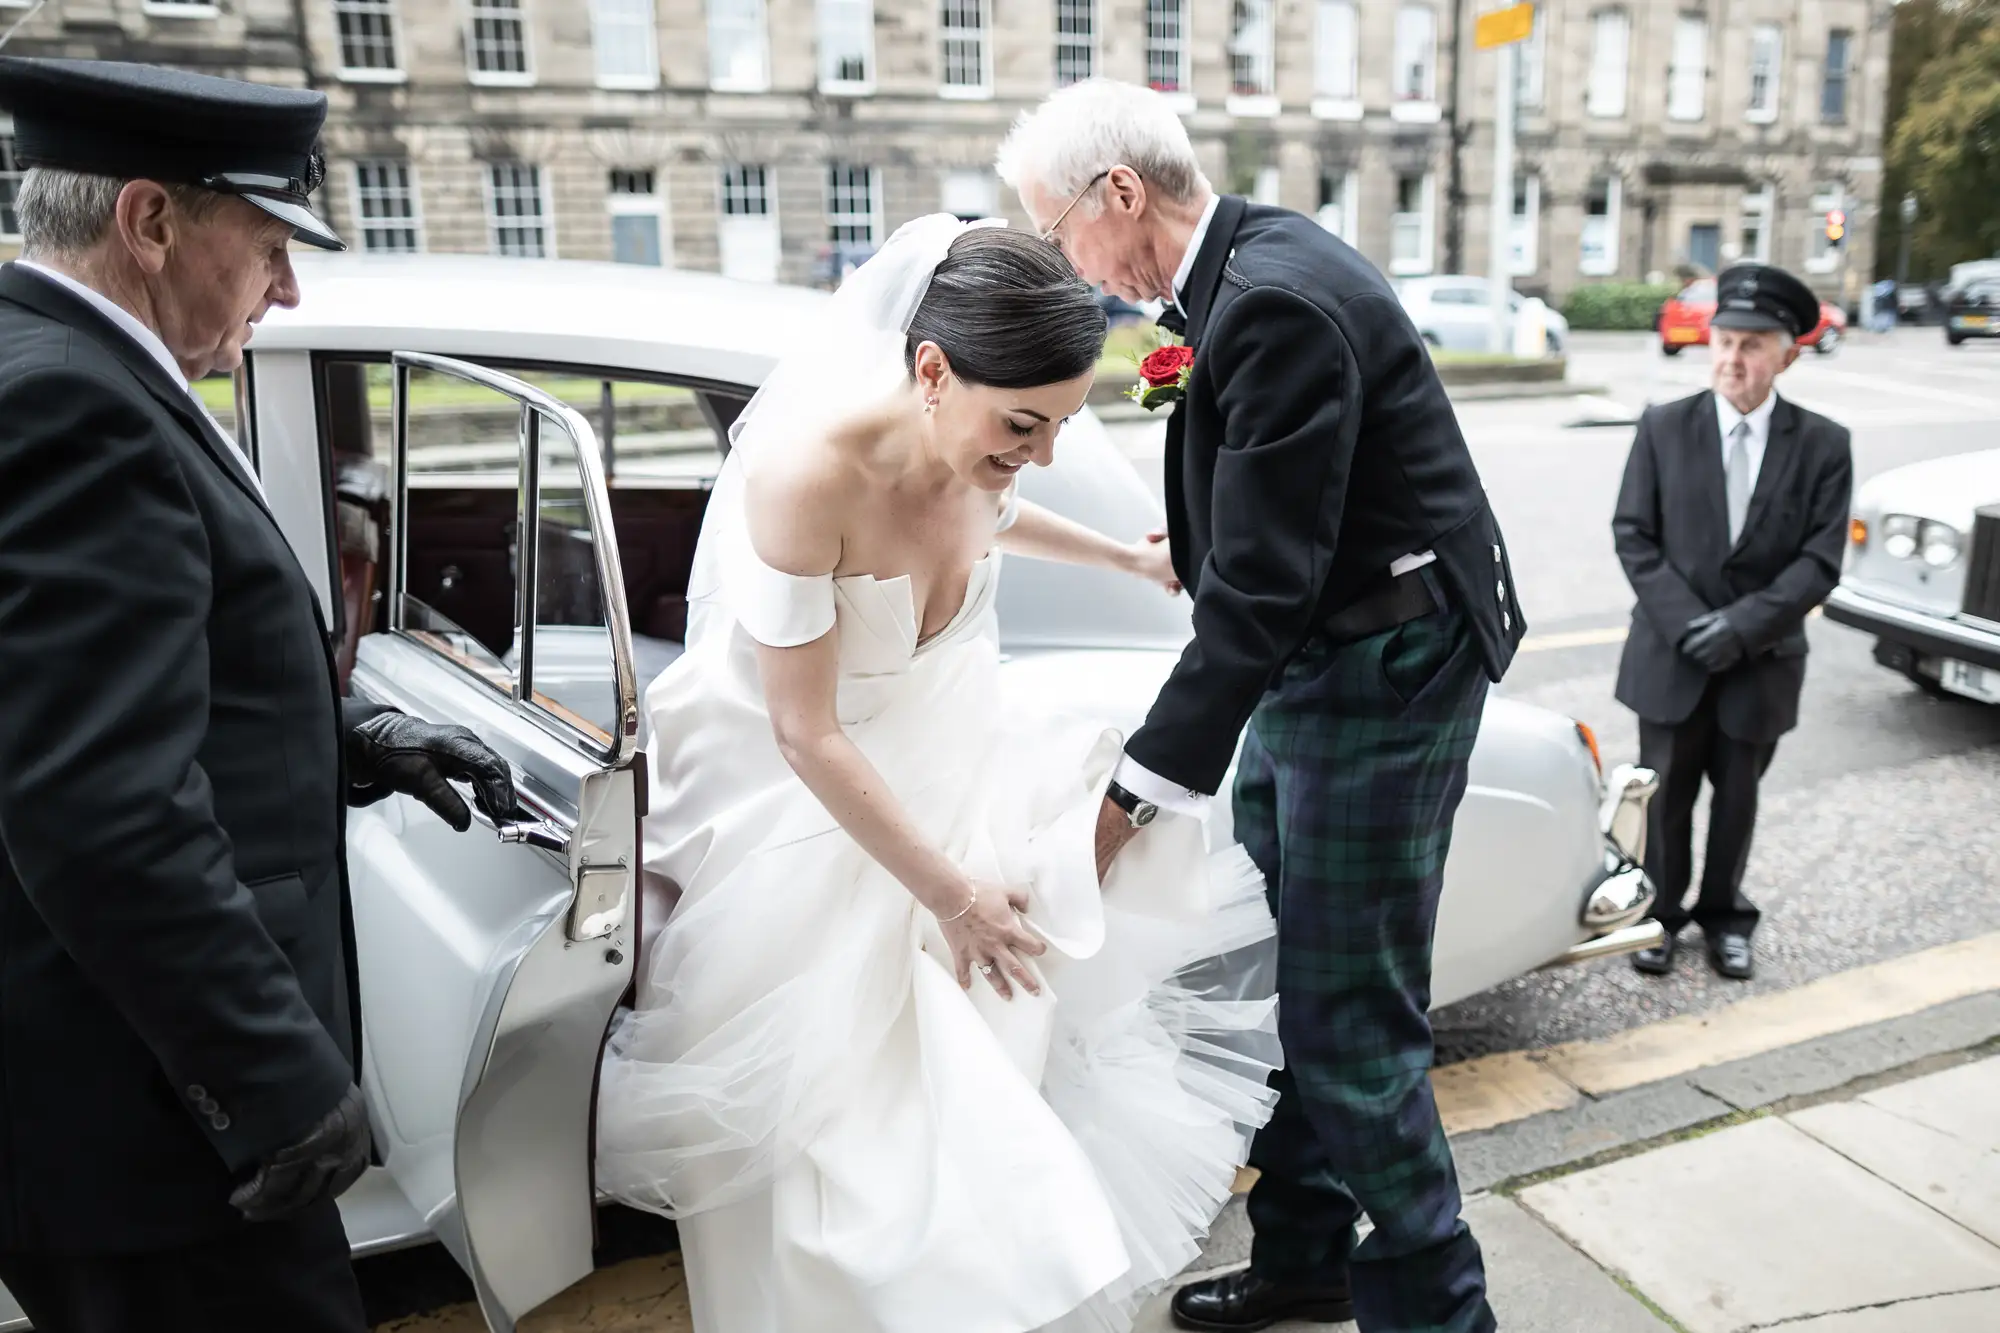 A bride in a white dress exiting a vintage car with assistance from an elderly man, while two men in formal attire observe.